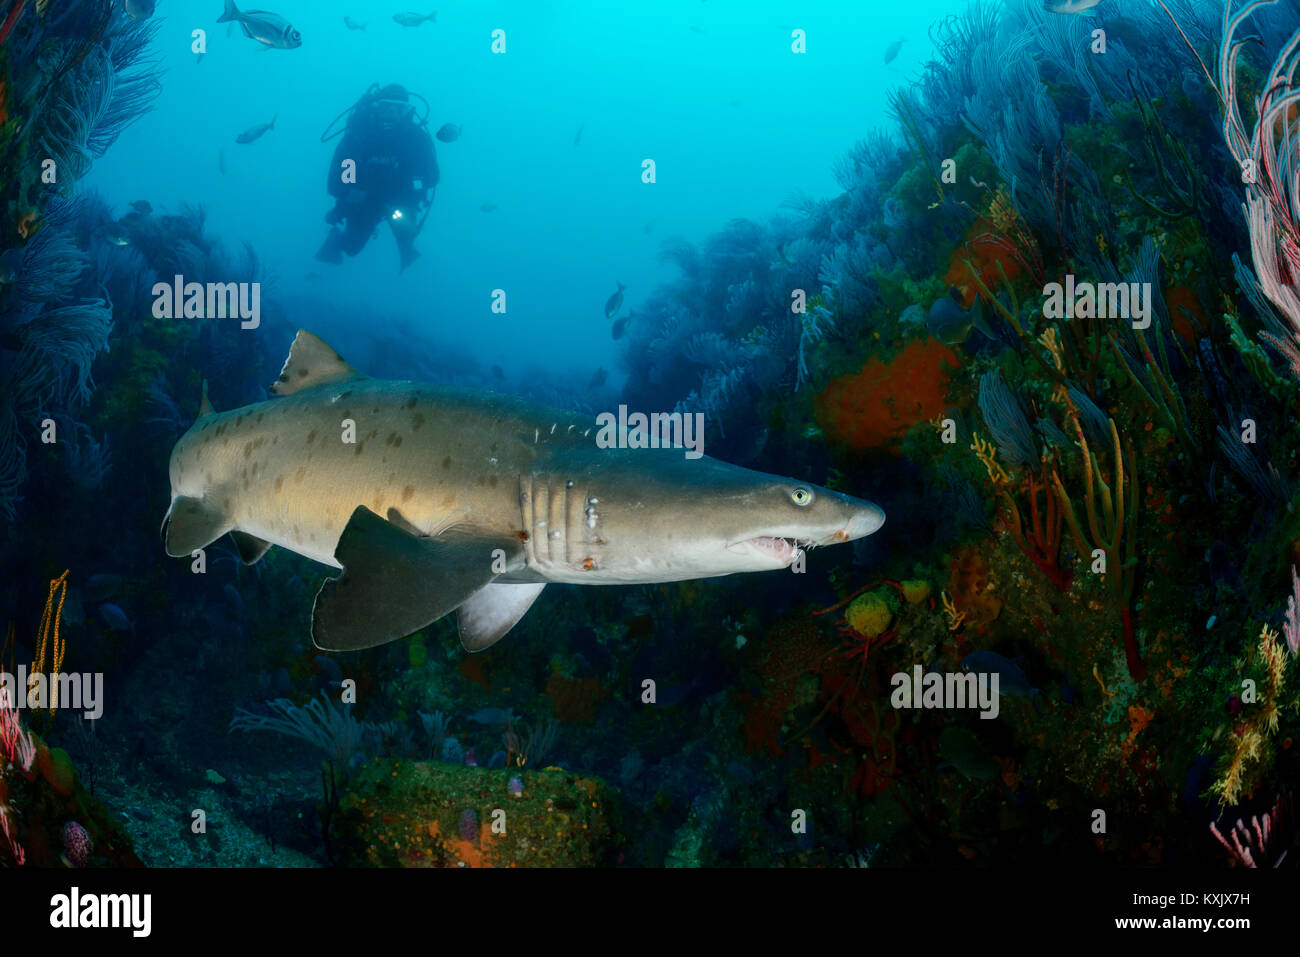 Sand tiger shark, Raggedthoothed Shark and scuba diver, Carcharias taurus, Porth Elizabeth, Algoa Bay, Nelson Mandela Bay, South Africa, Indian Ocean Stock Photo